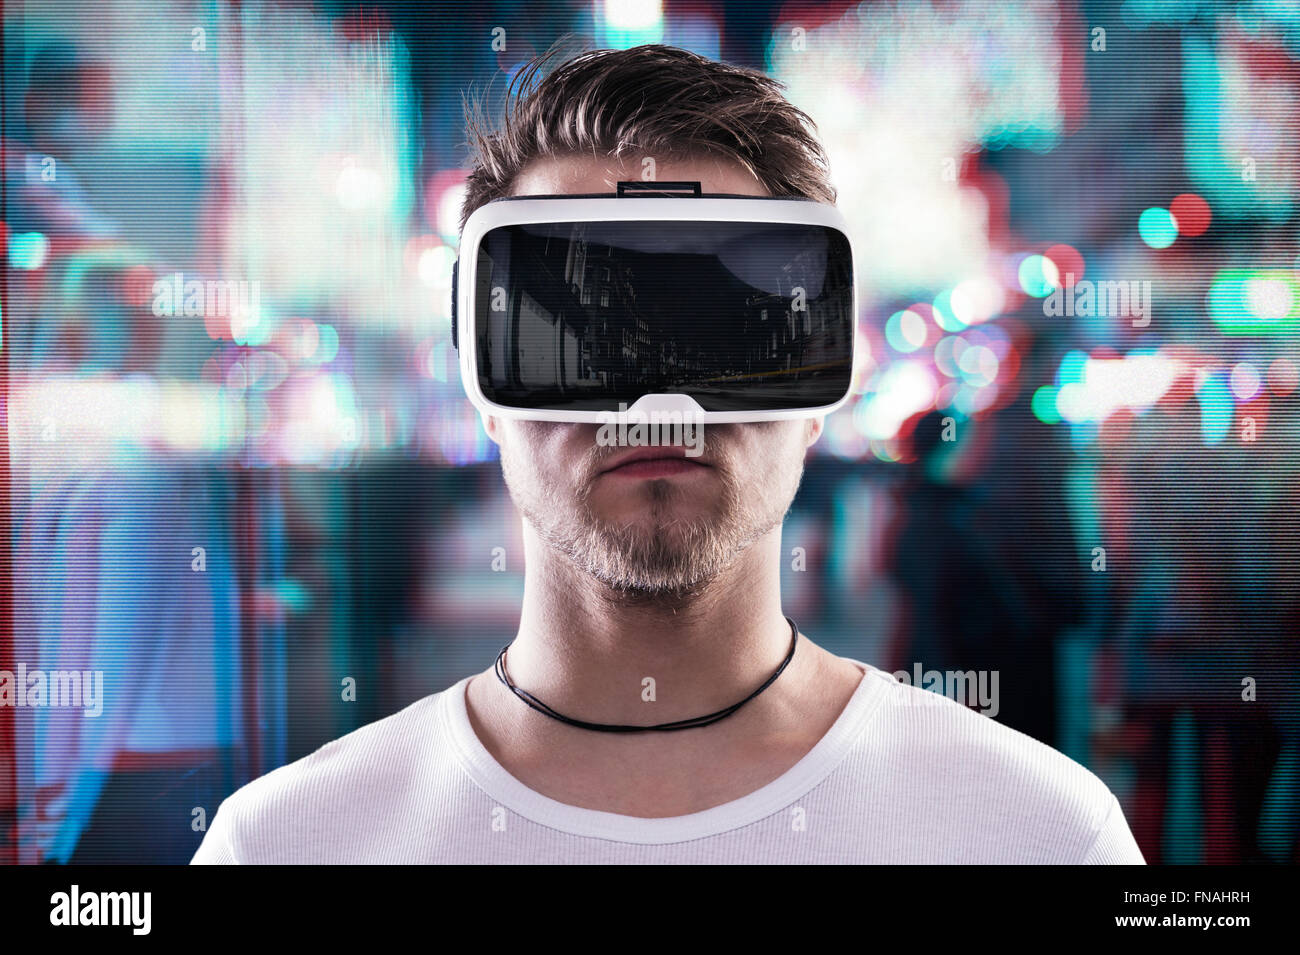 Man wearing virtual reality goggles against night city Stock Photo